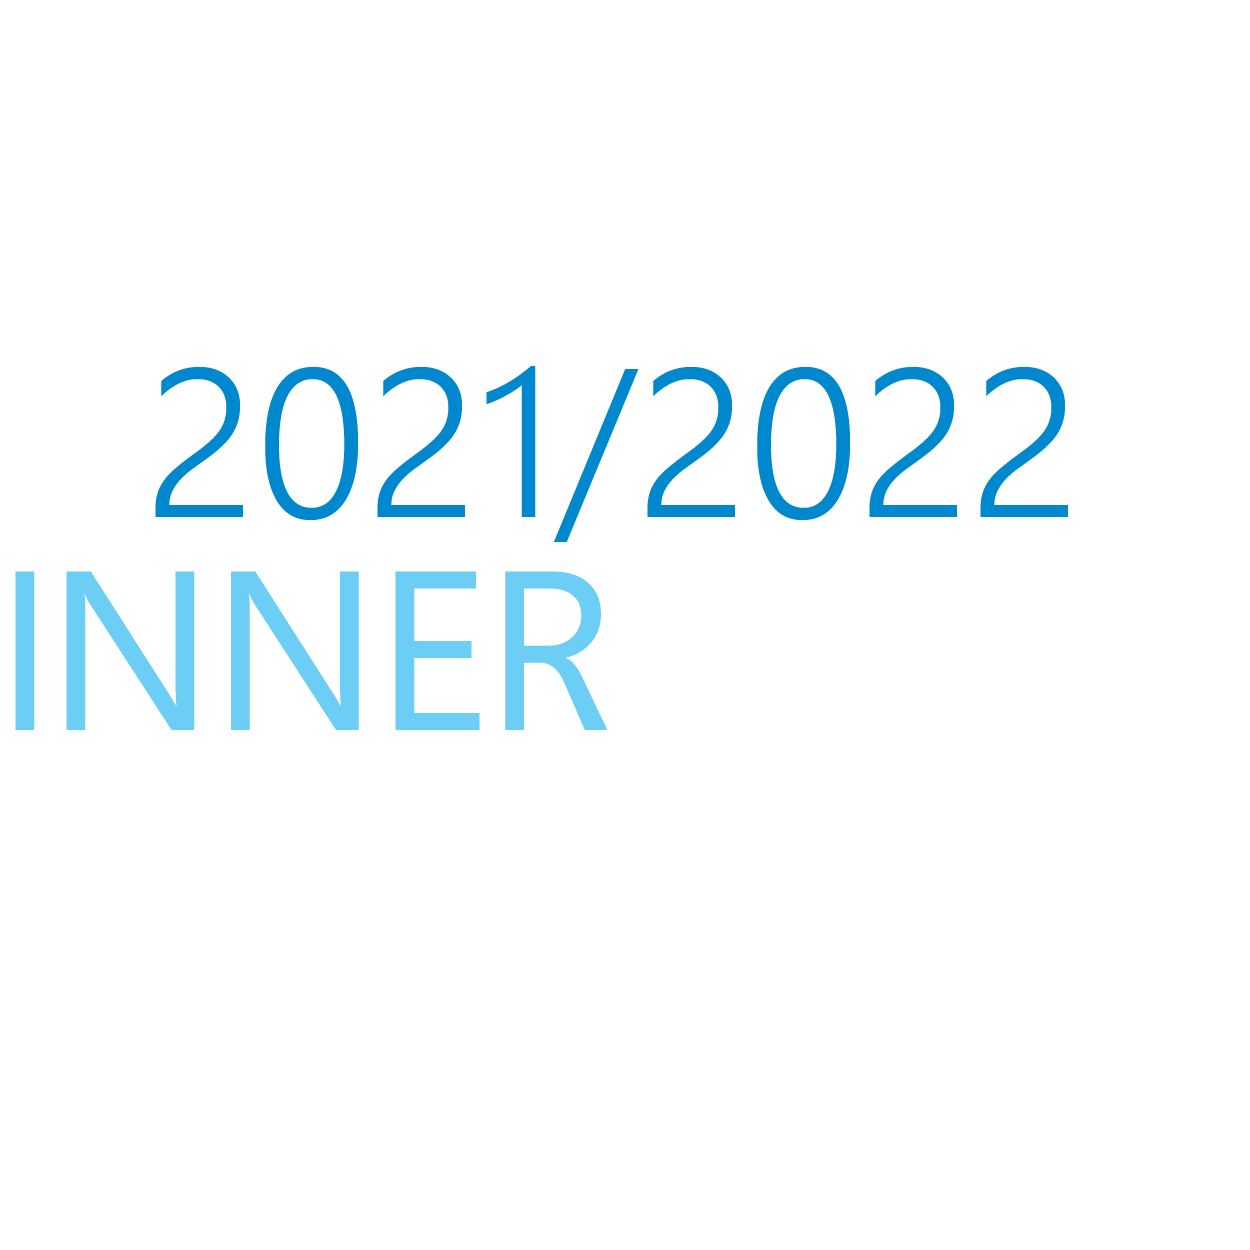 2021.2022 innerciricle squares 03